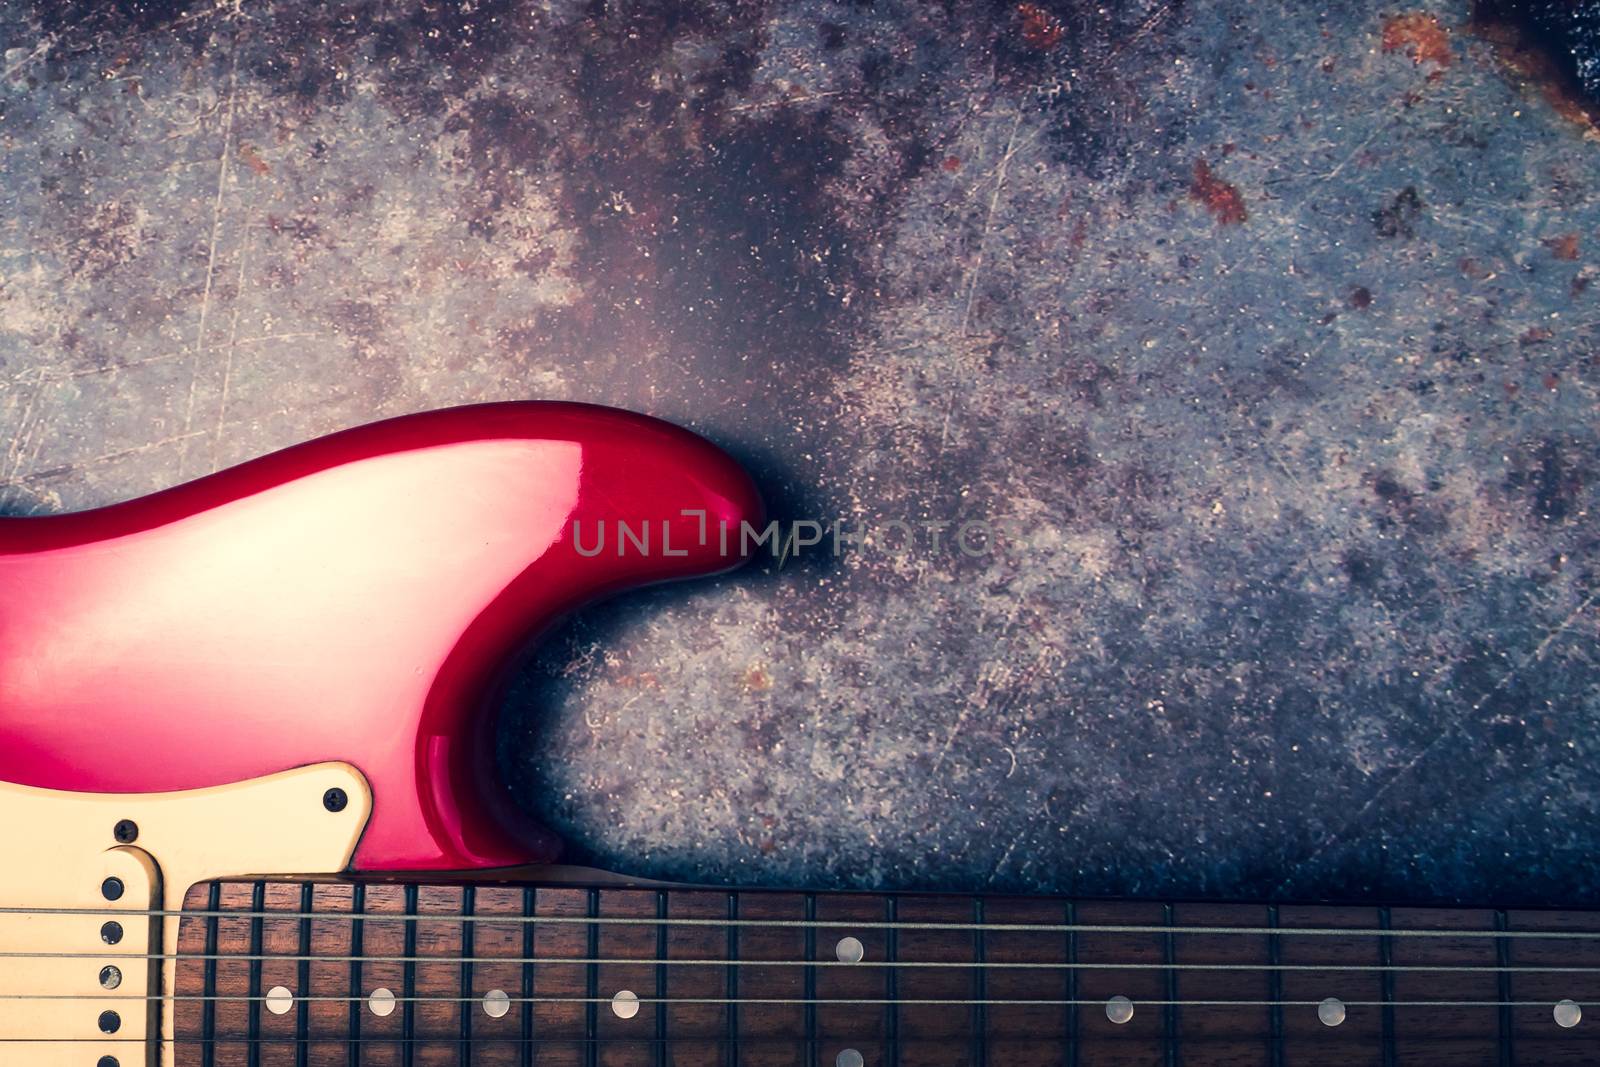 A red electric guitar on a grunge background.